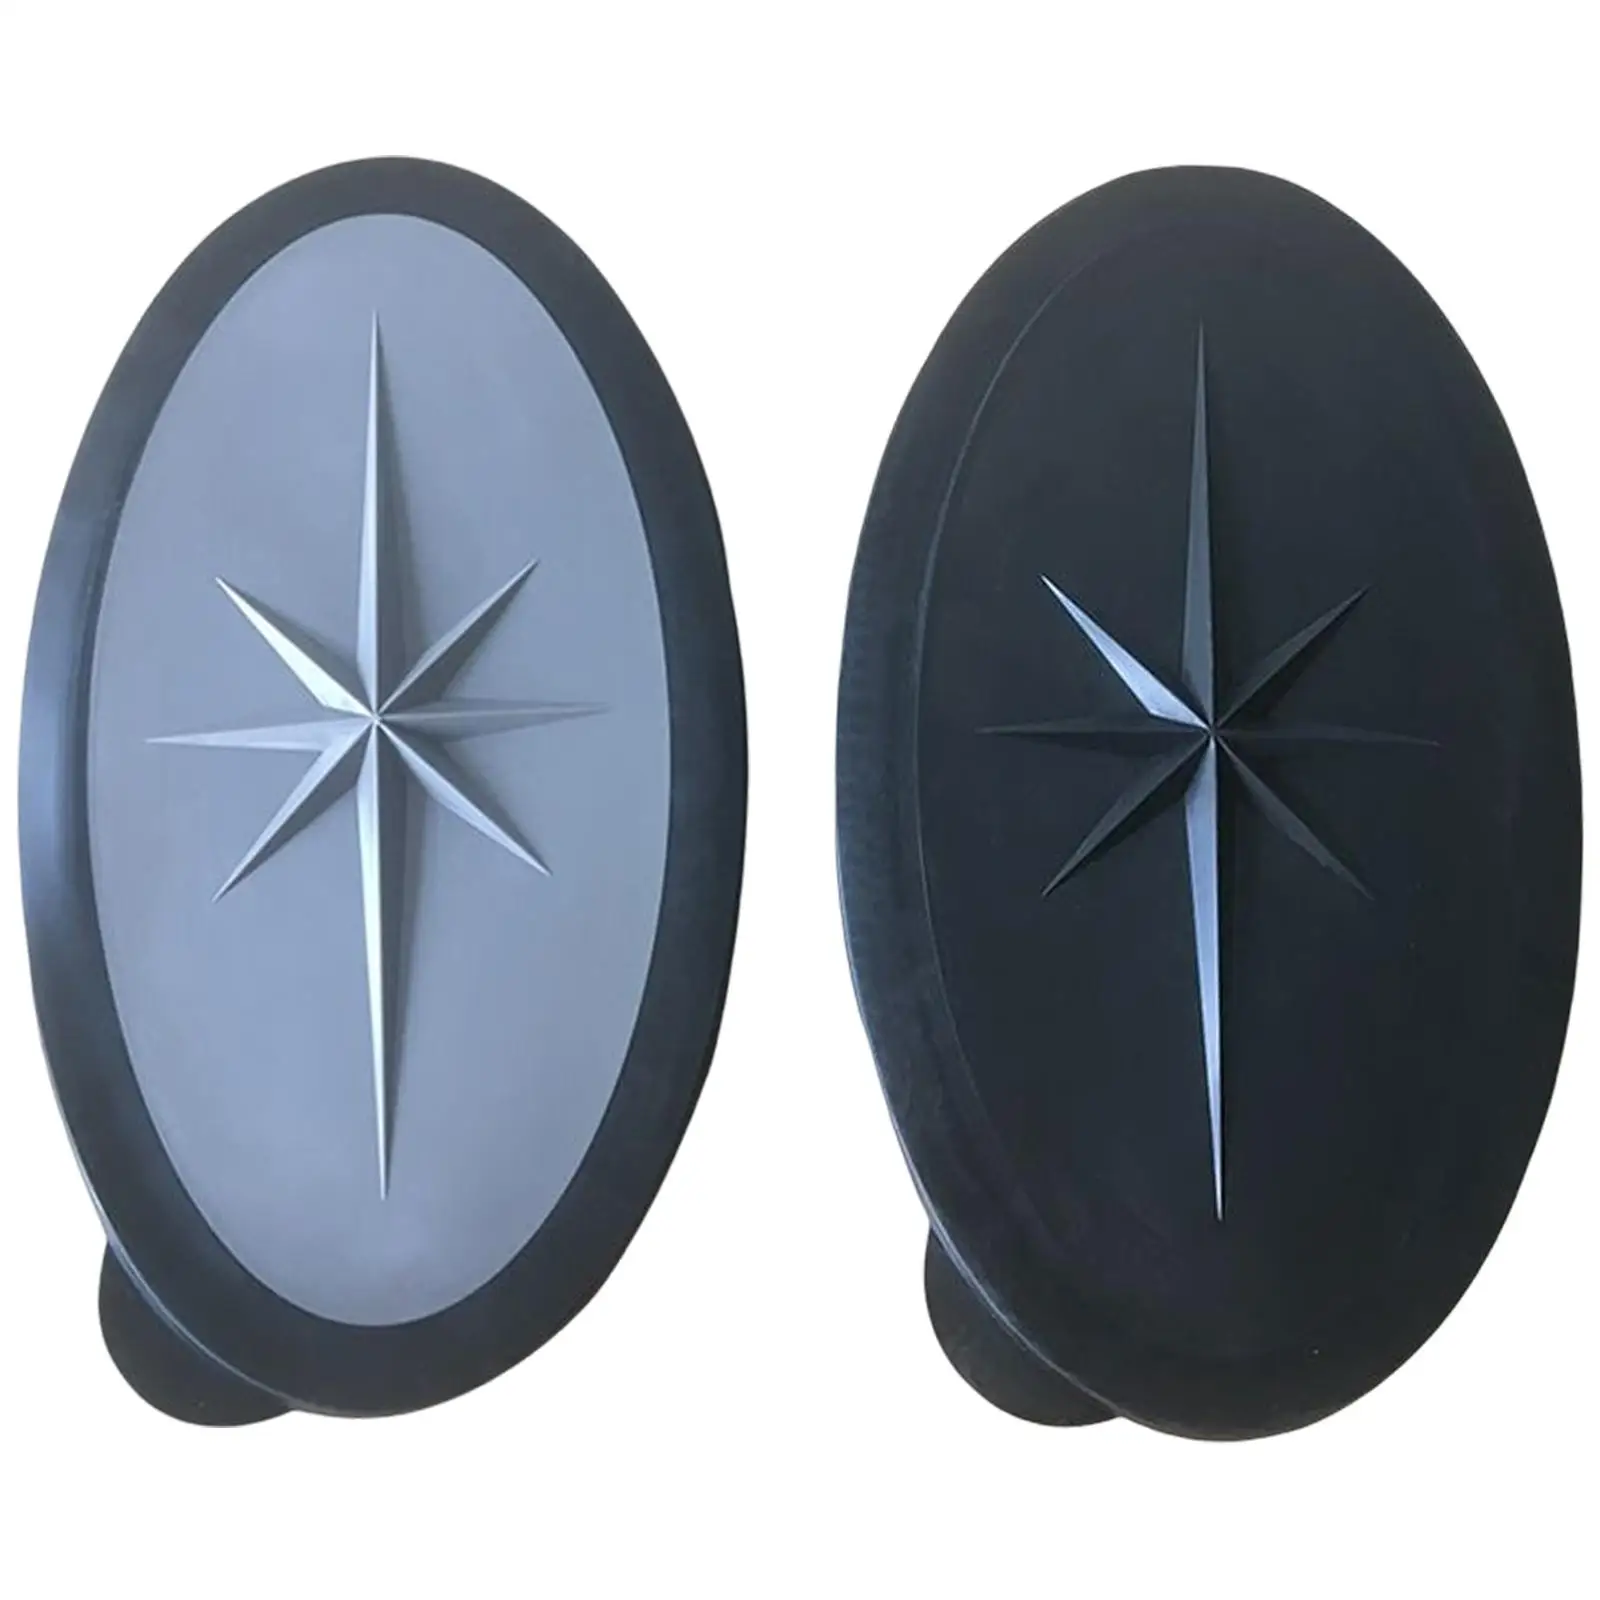 Oval Hatch Cover Boat Accessories Waterproof Non-Slip ABS Boat Hatch Lid Kayak Fit for Water Sport Canoe Yacht